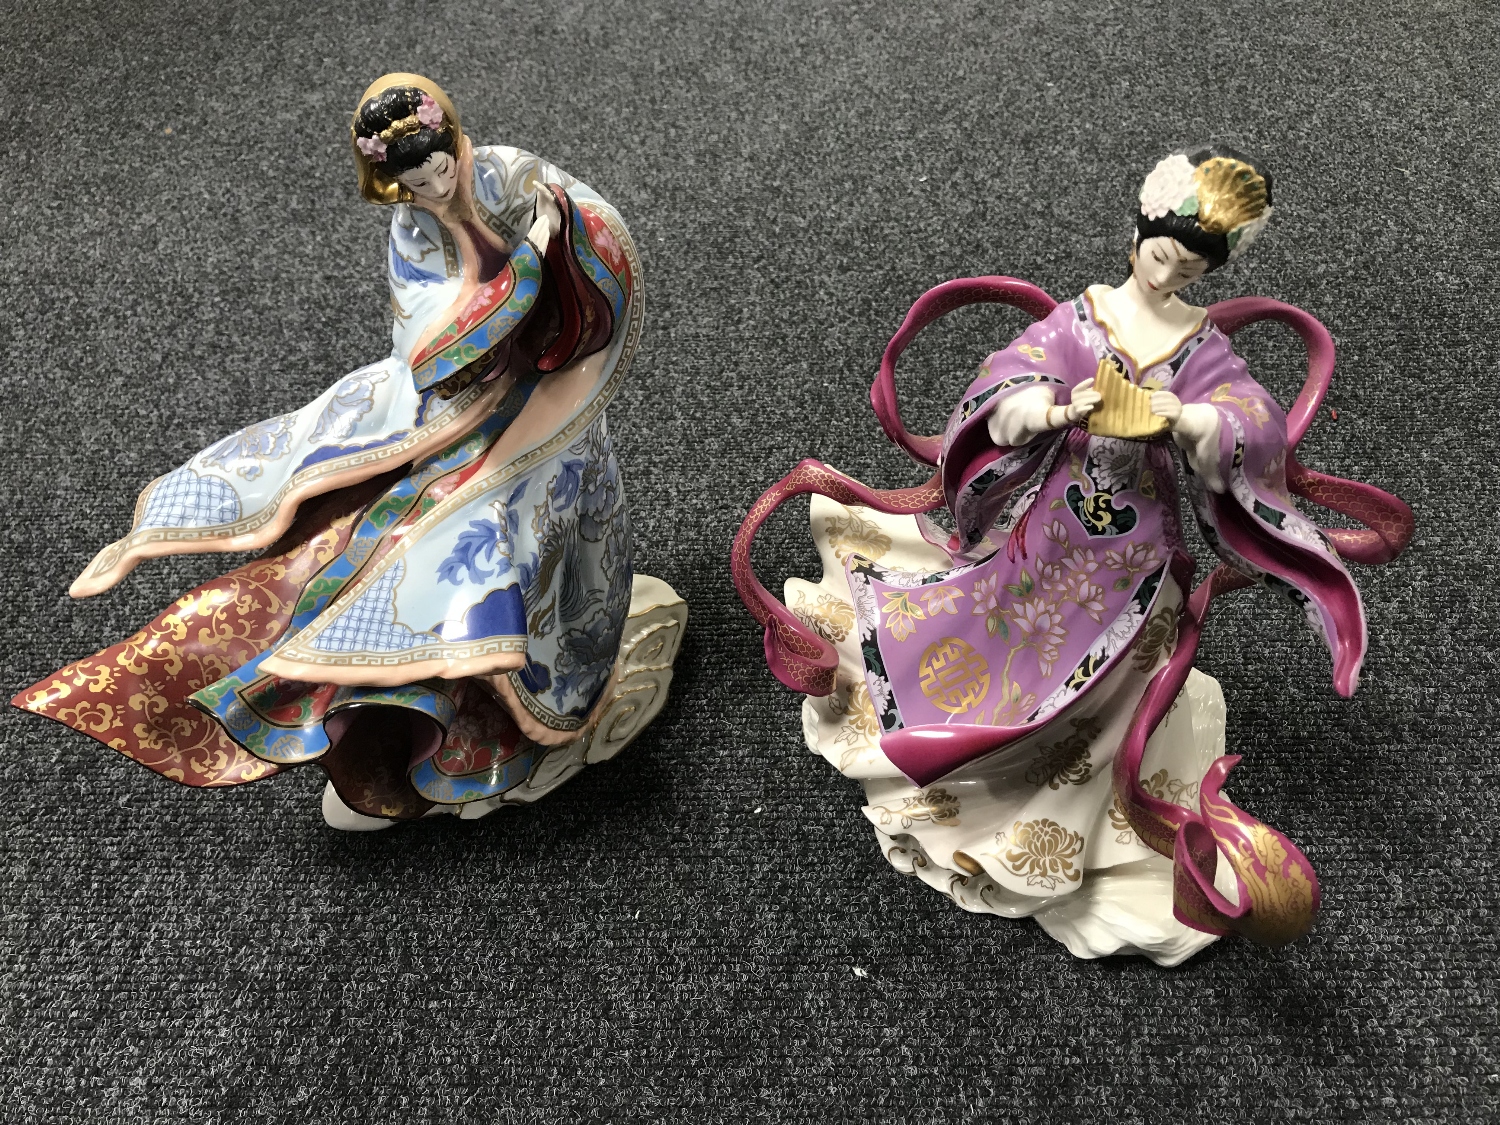 Two Franklin Mint figures - The Dragon Kings Daughter M1576 and The Empress of Snow M9970